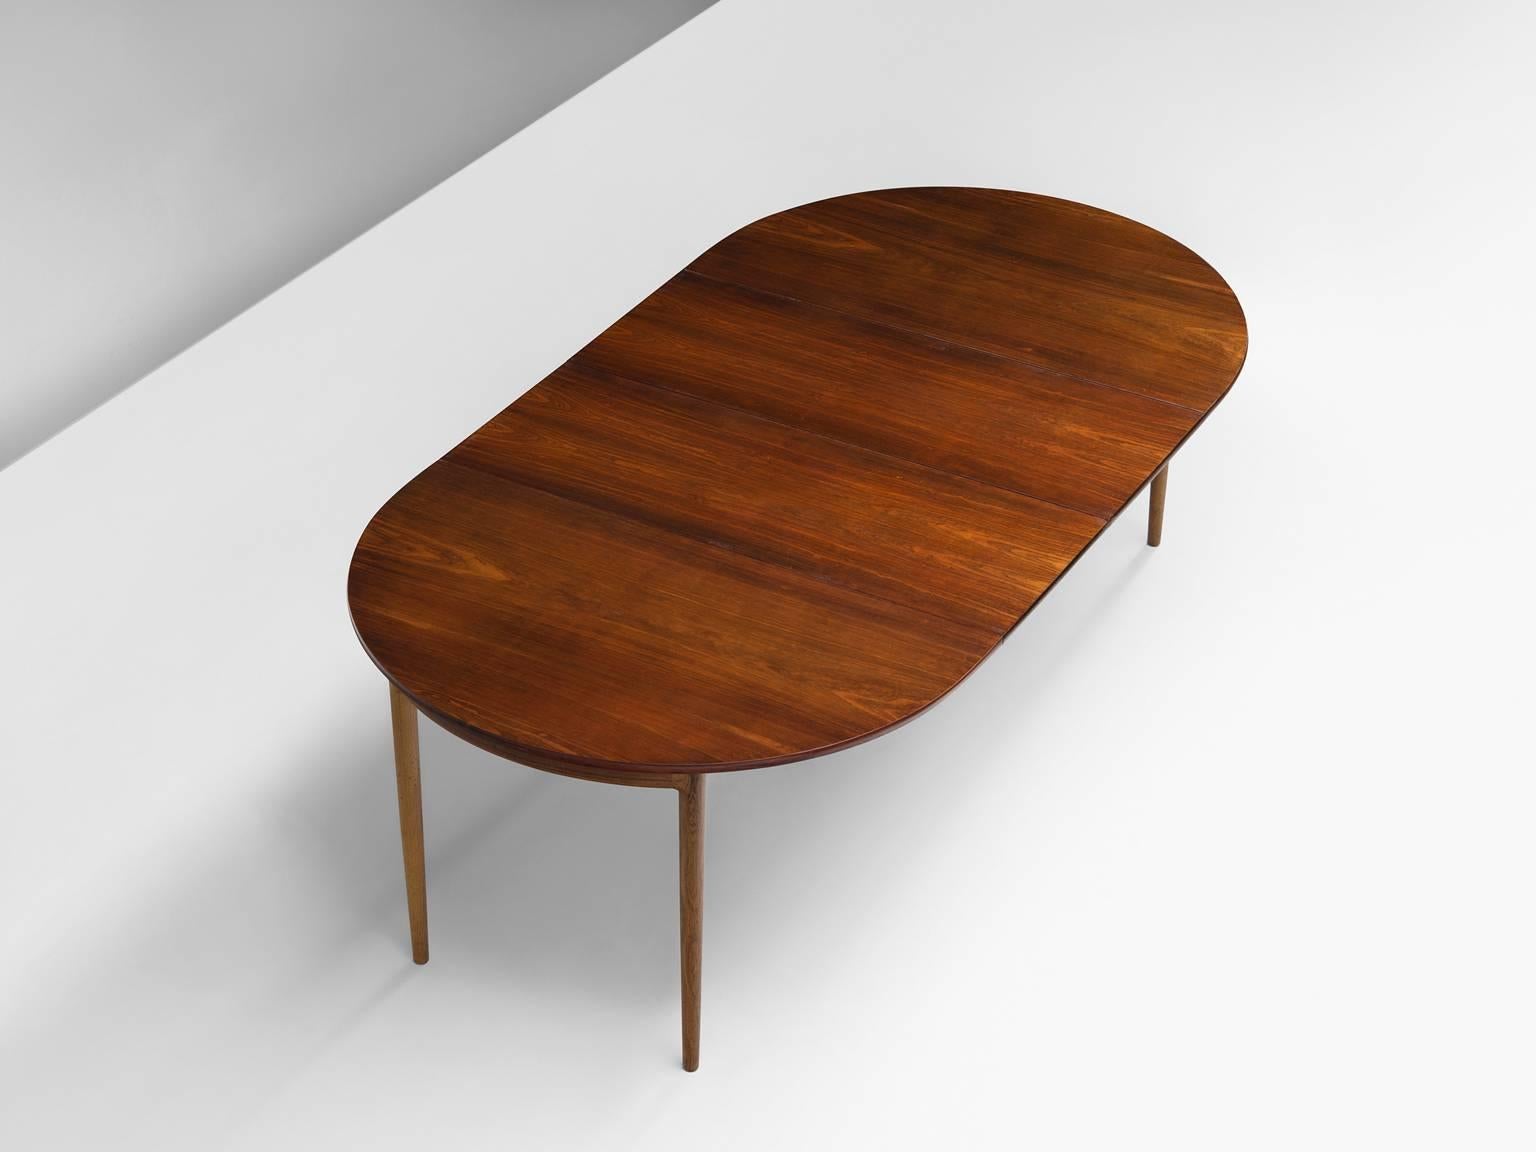 Table, rosewood, Denmark, 1950s.

This archetypical Mid-Century Danish dining table is oval and extendable. Ib Kofod-Larsen designed this Classic oval table for Faarup Møbelfabrik. The table's main feature is the rosewood grain and flames that flow